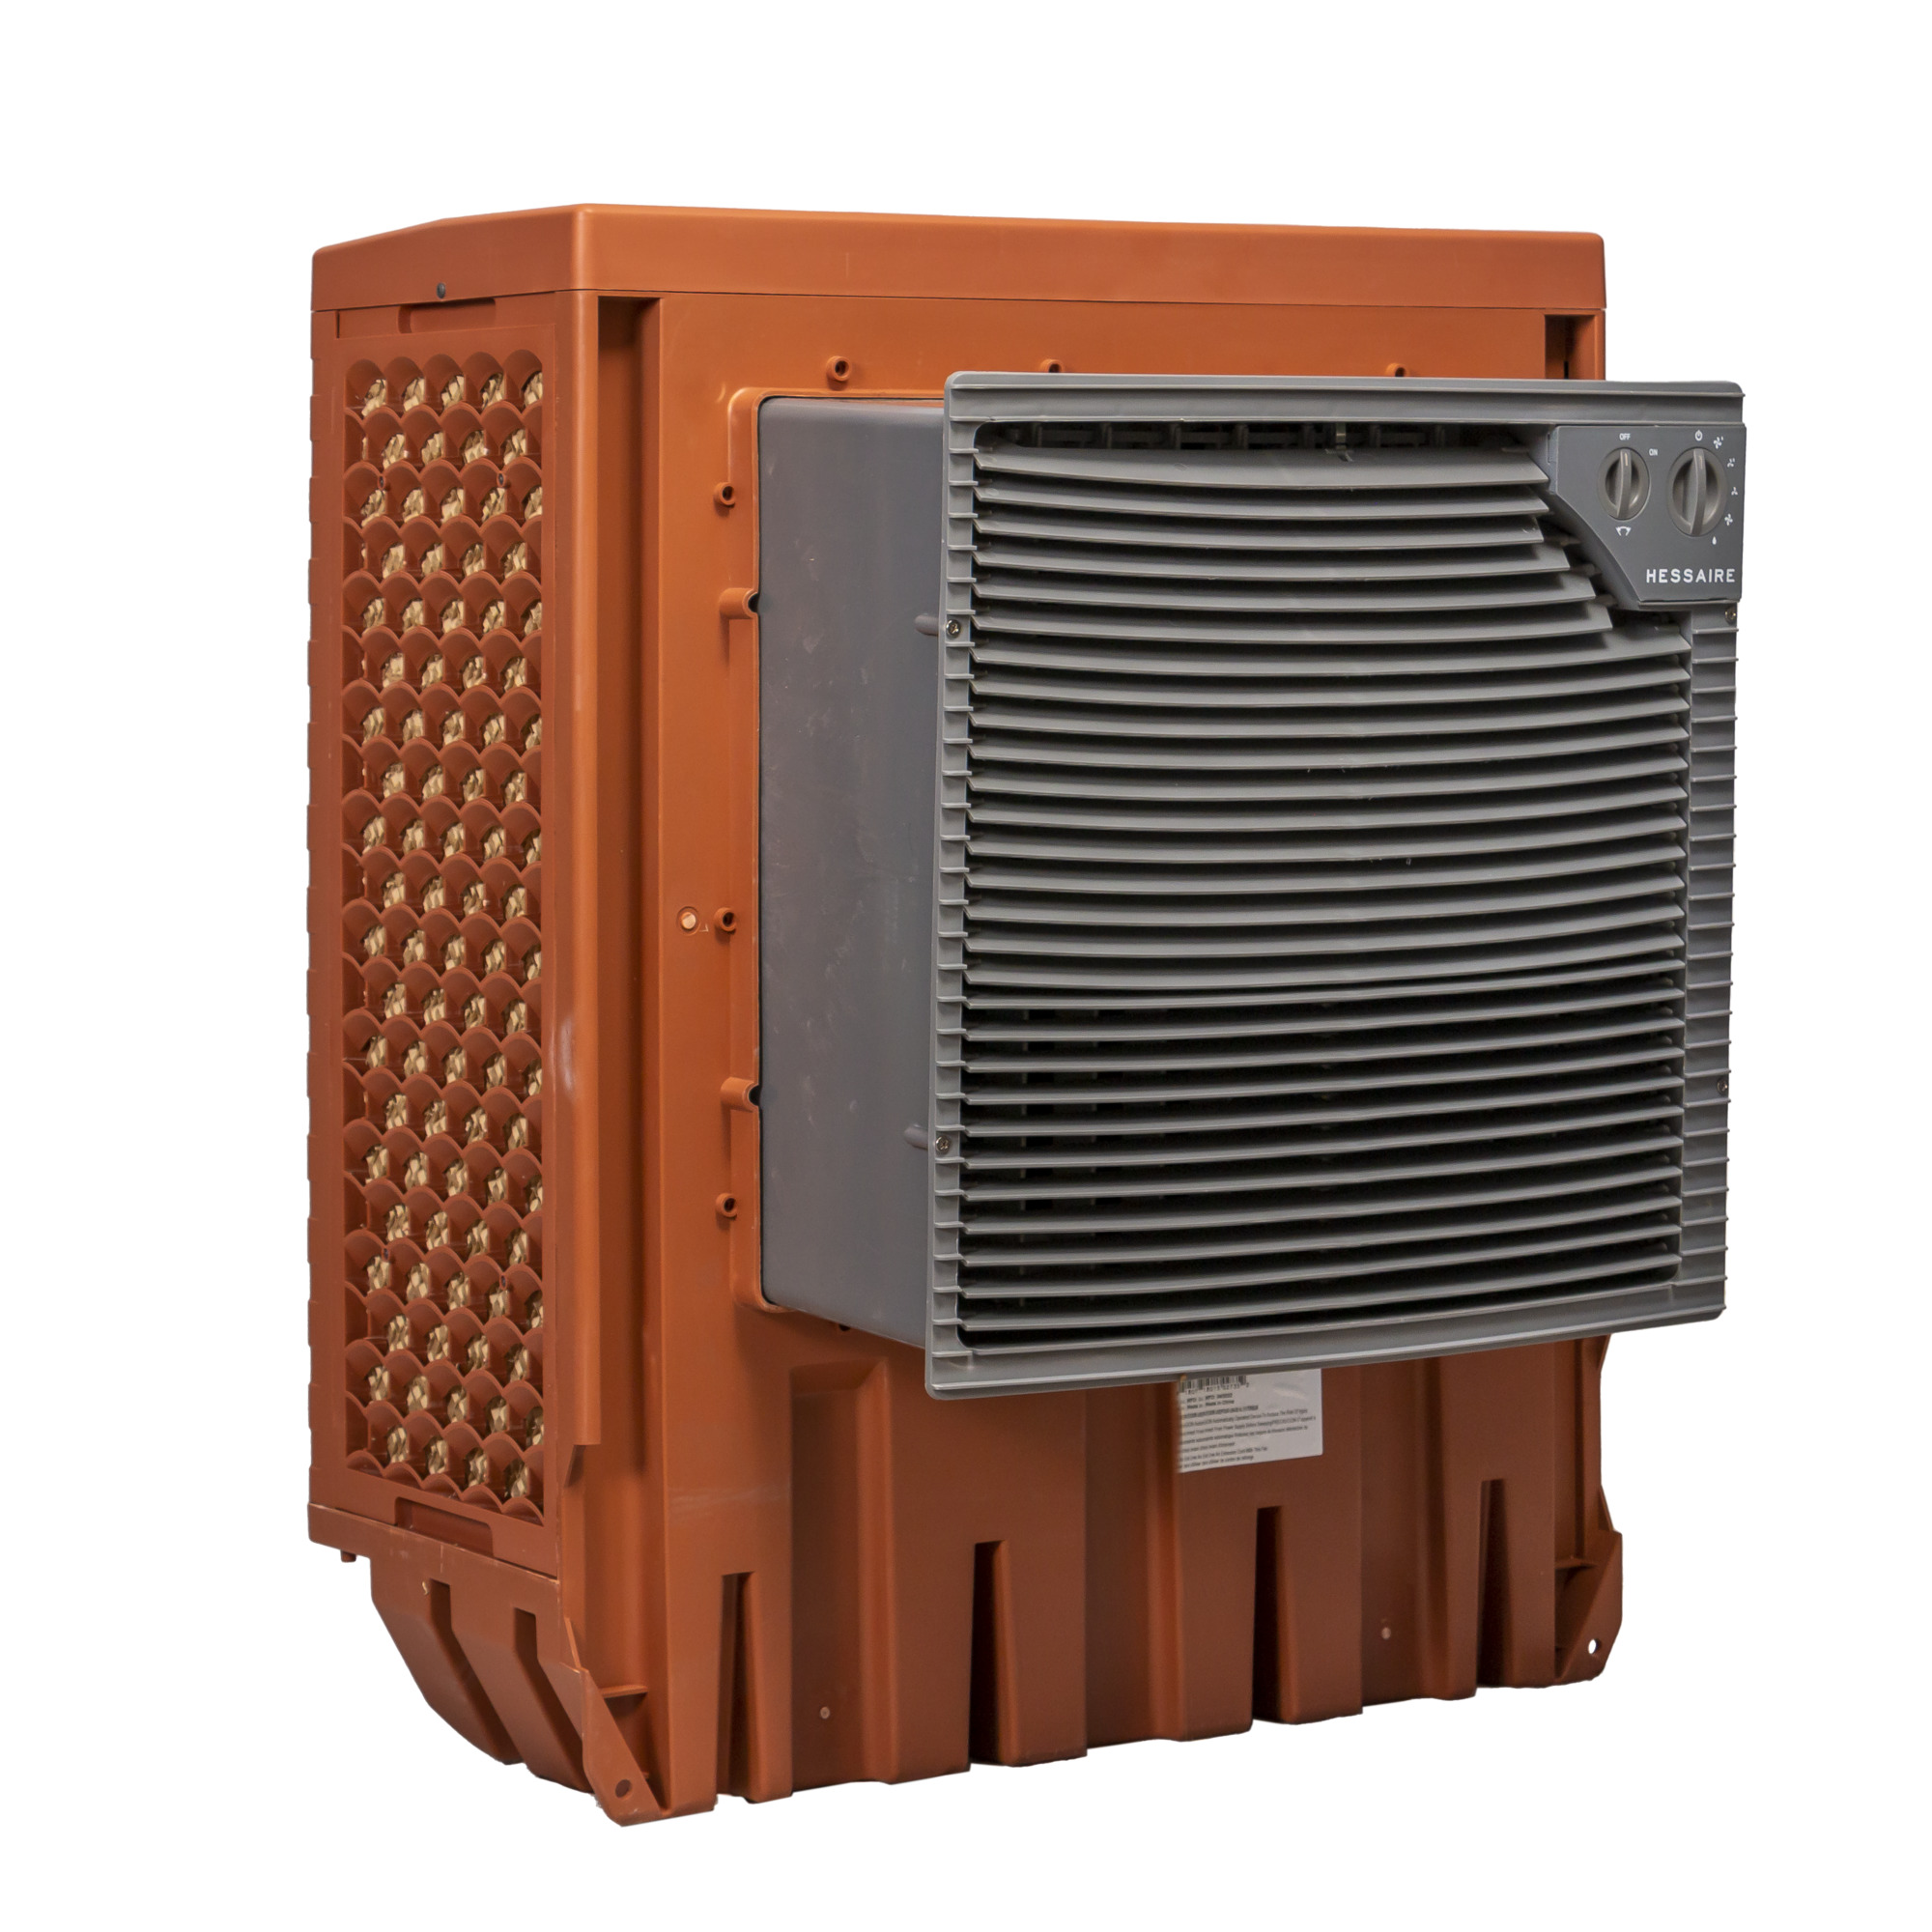 Hessaire, Window Mounted Evaporative Cooler, Air Delivery 6100 cfm, Oscillating, Model DXW6100